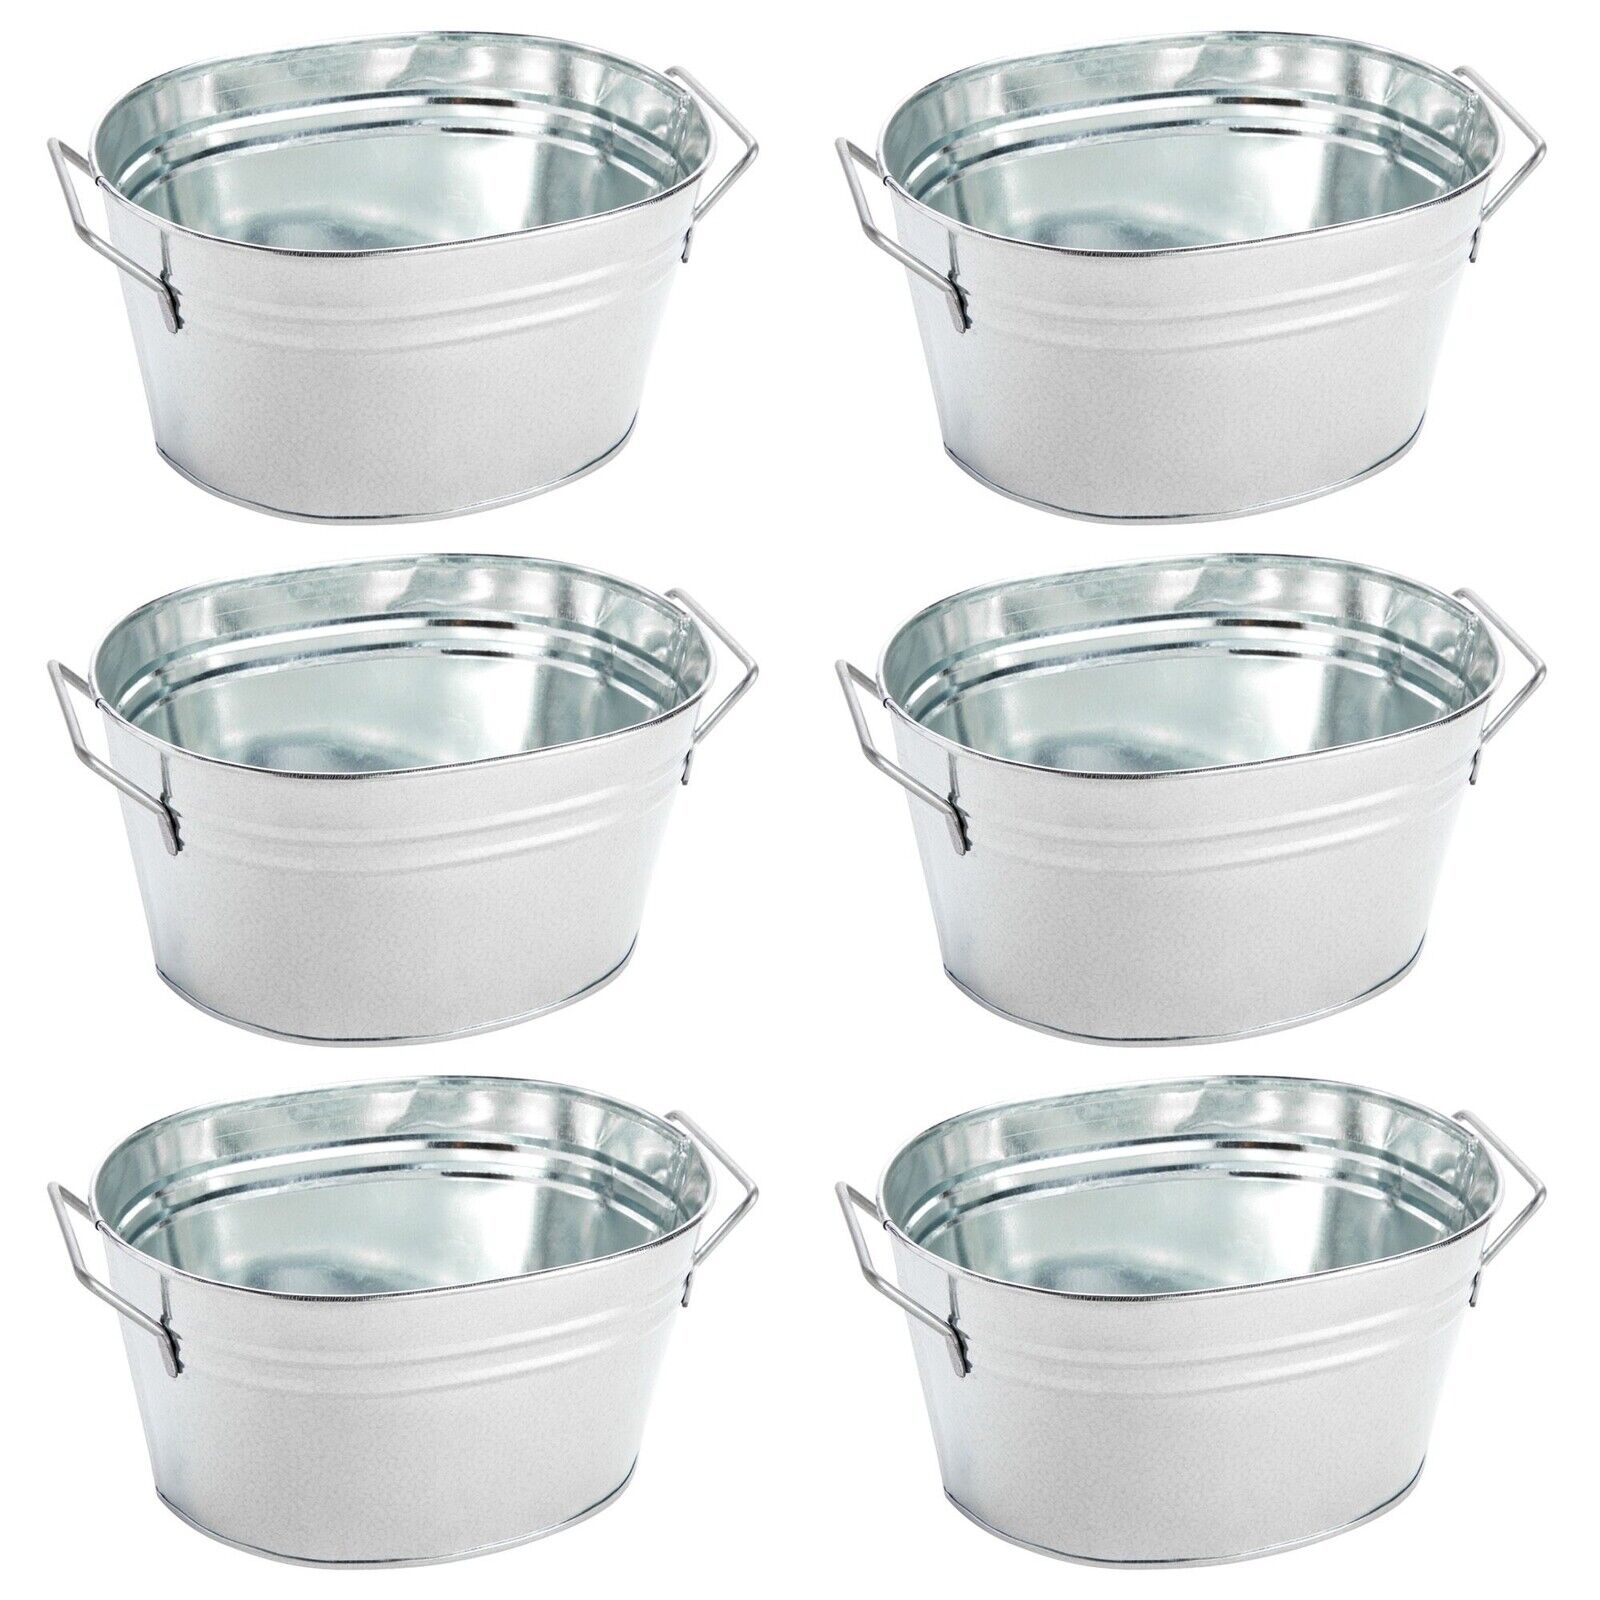 6 Pack Small Galvanized Buckets with Handles for Plants, Decor, 7.5 x 6.4 x 4 In